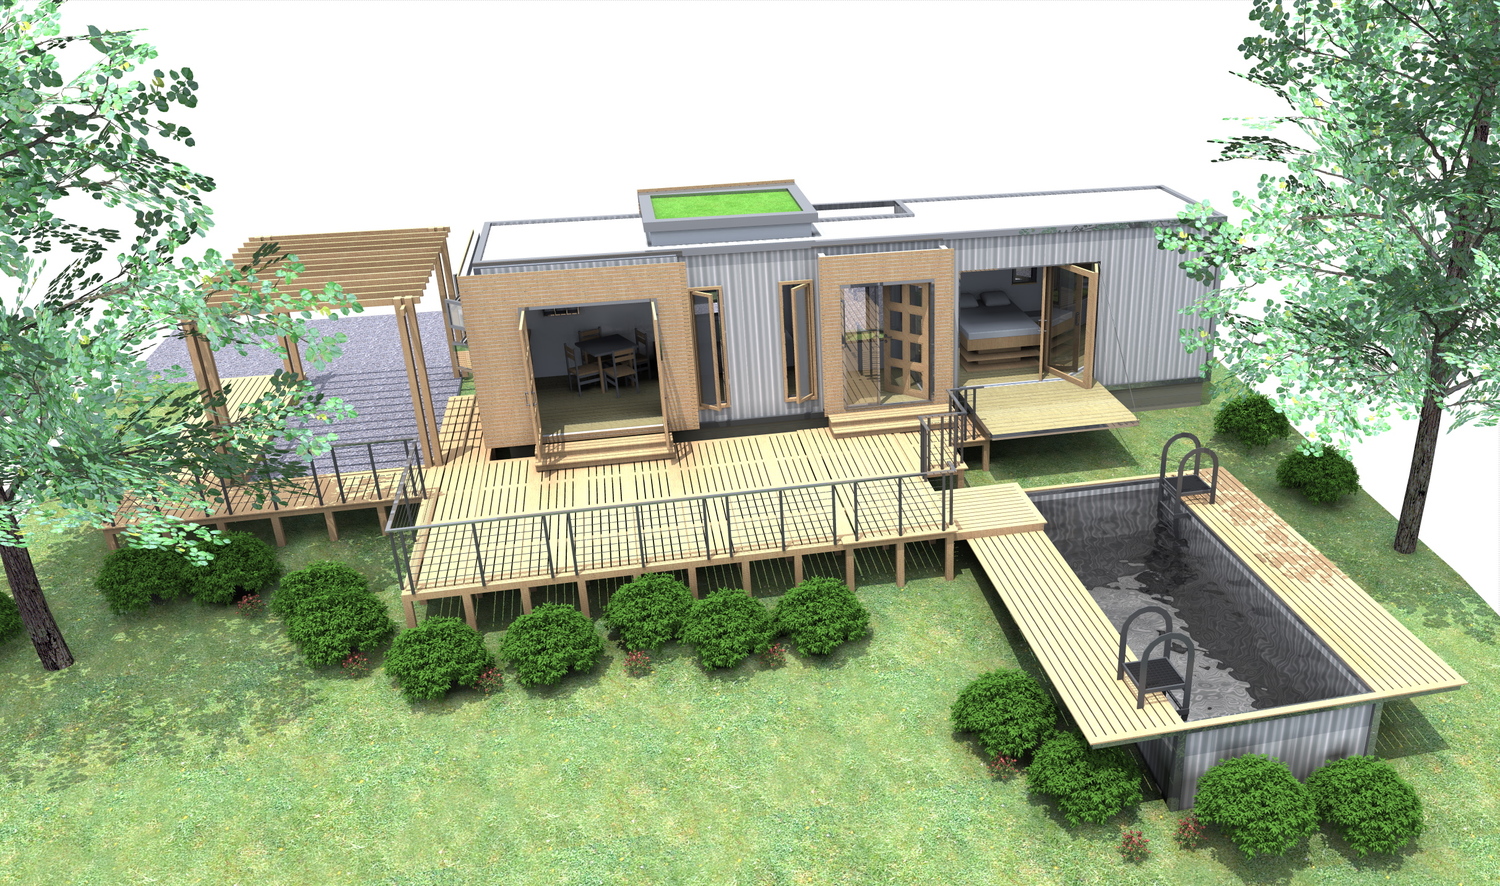 Shipping Container Home Designs